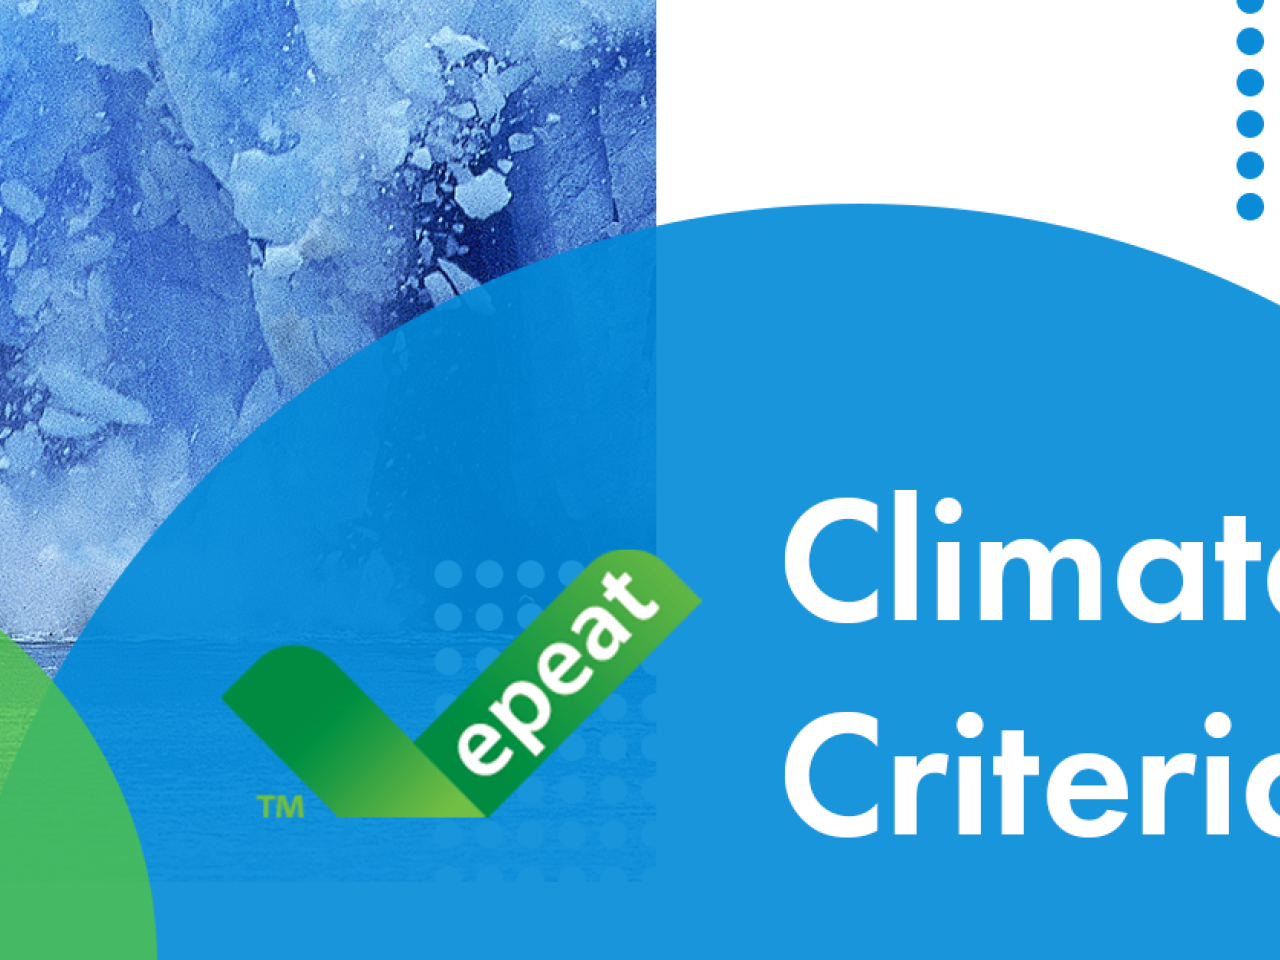 Banner reading, "epeat climate criteria"